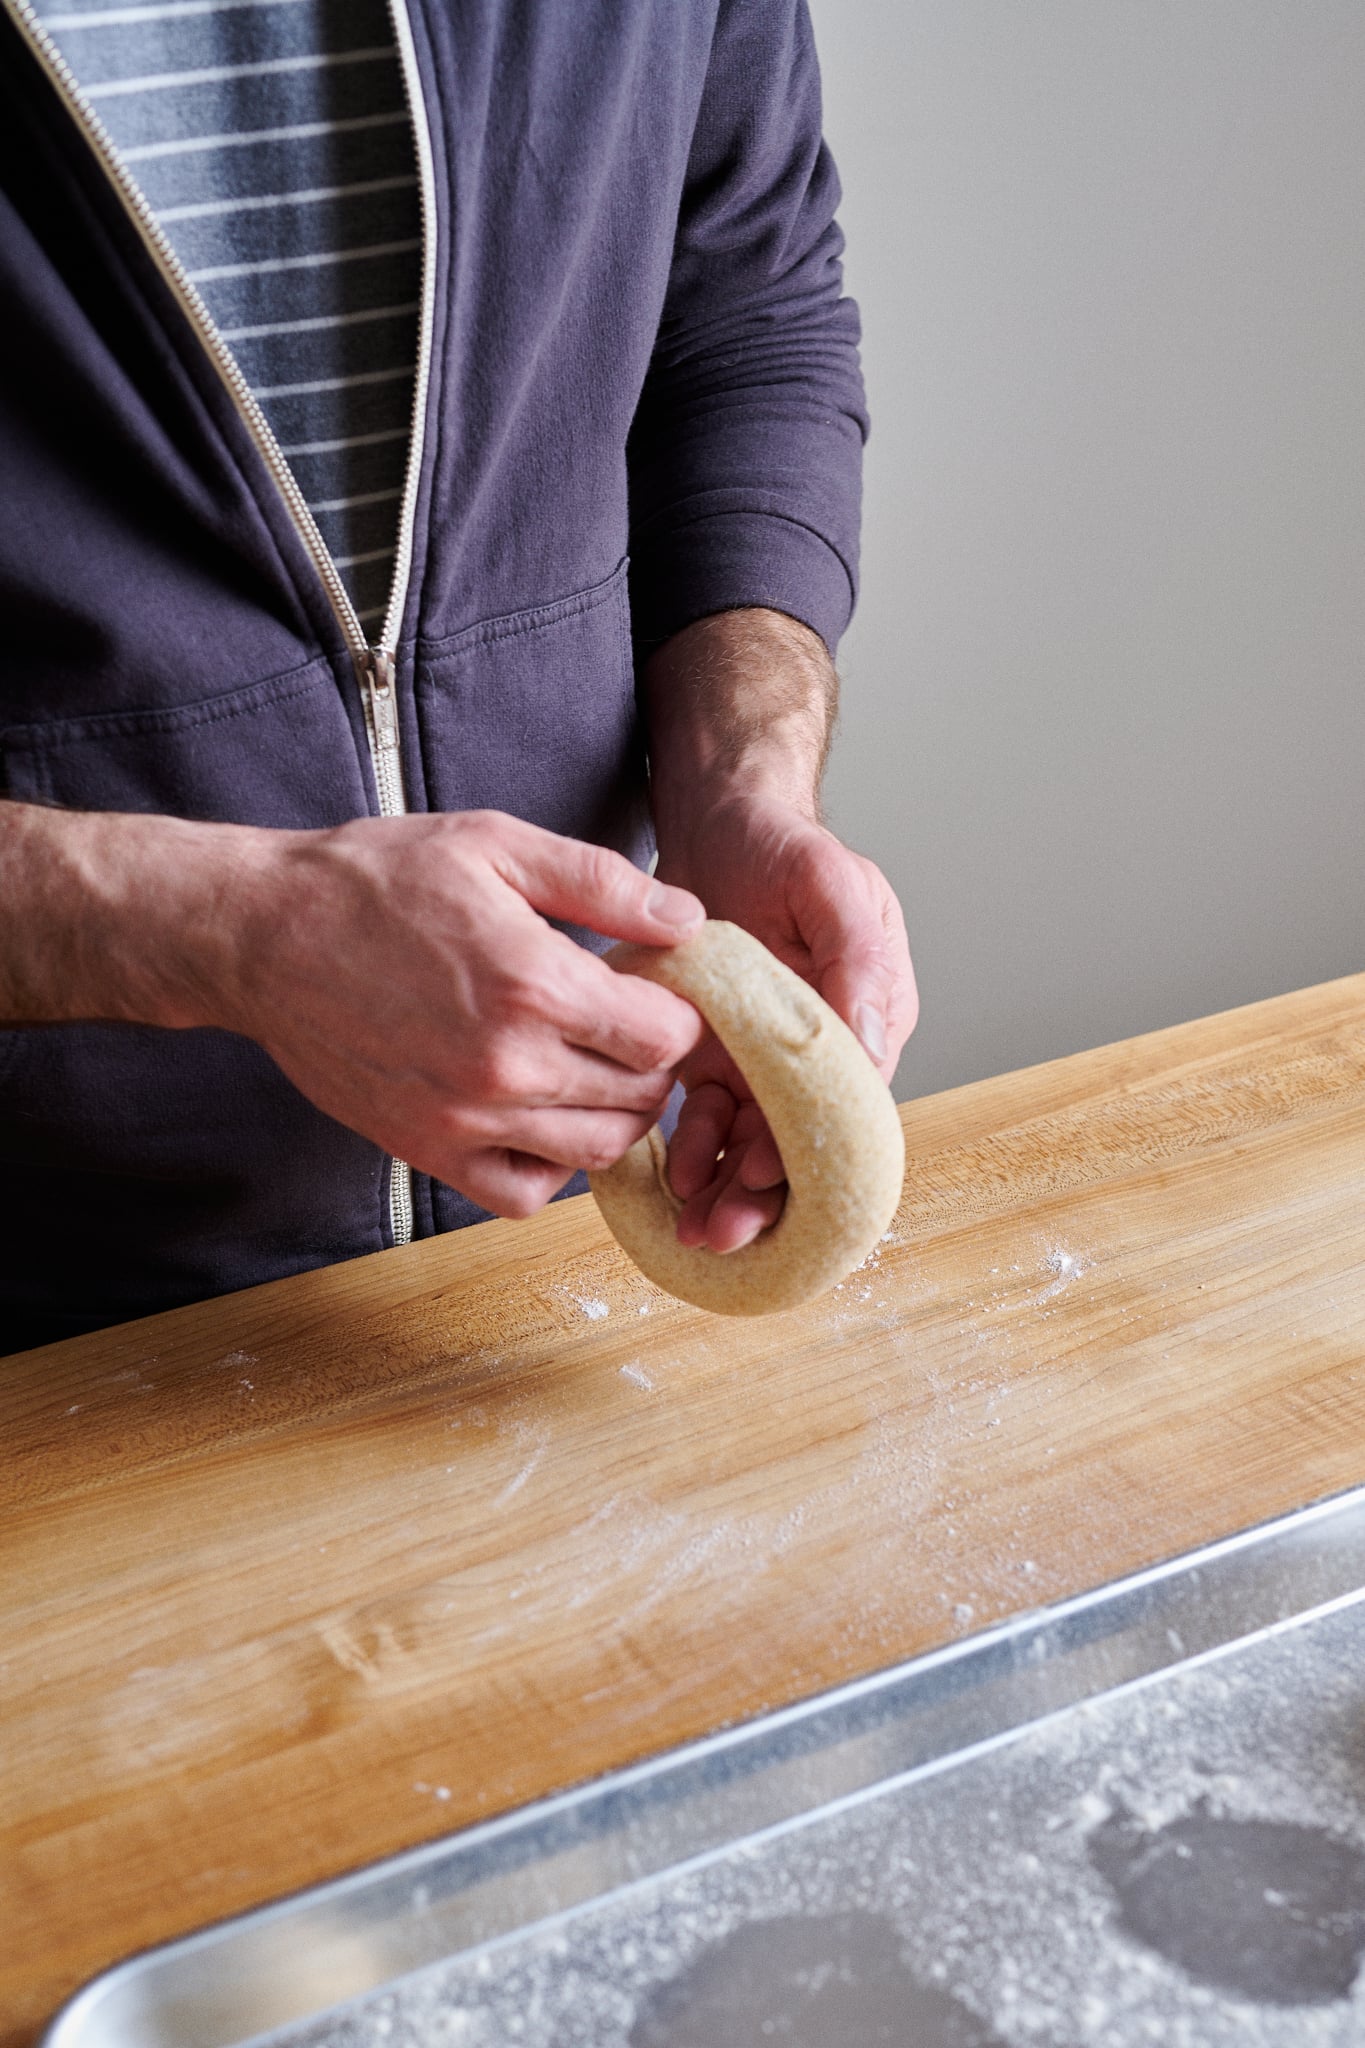 Stretch the sourdough friselle dough to make the ring larger.